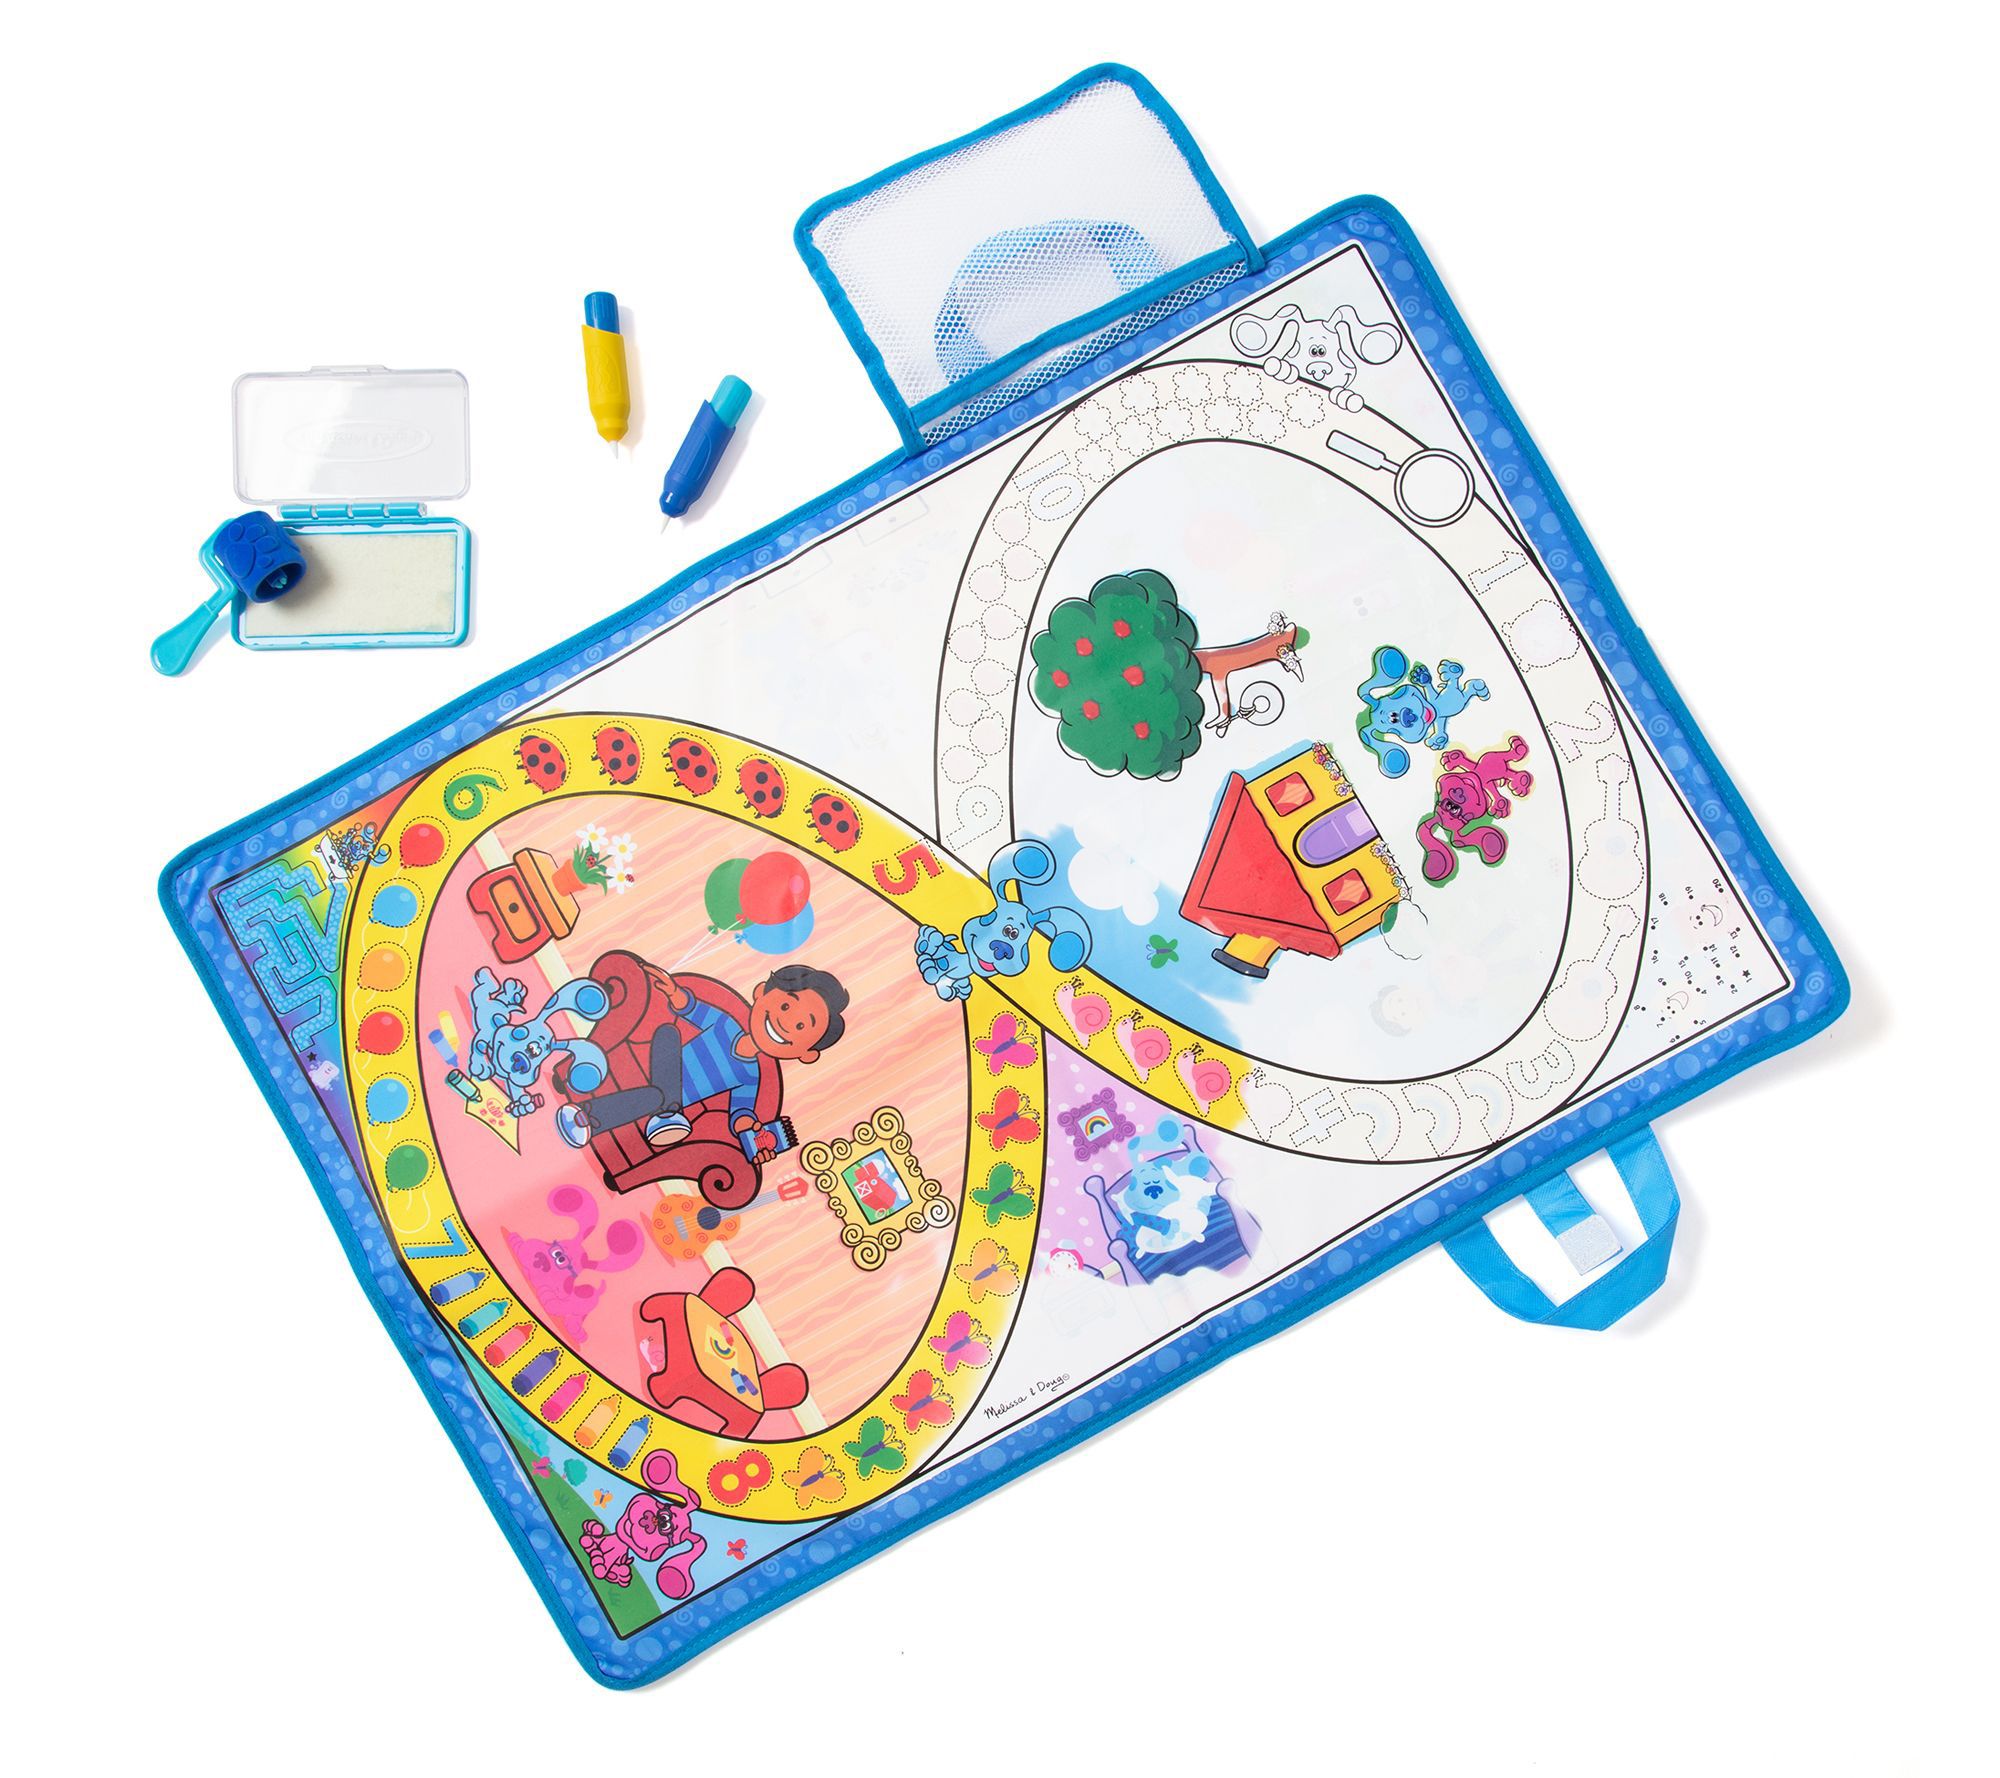 Water Wow Activity Book